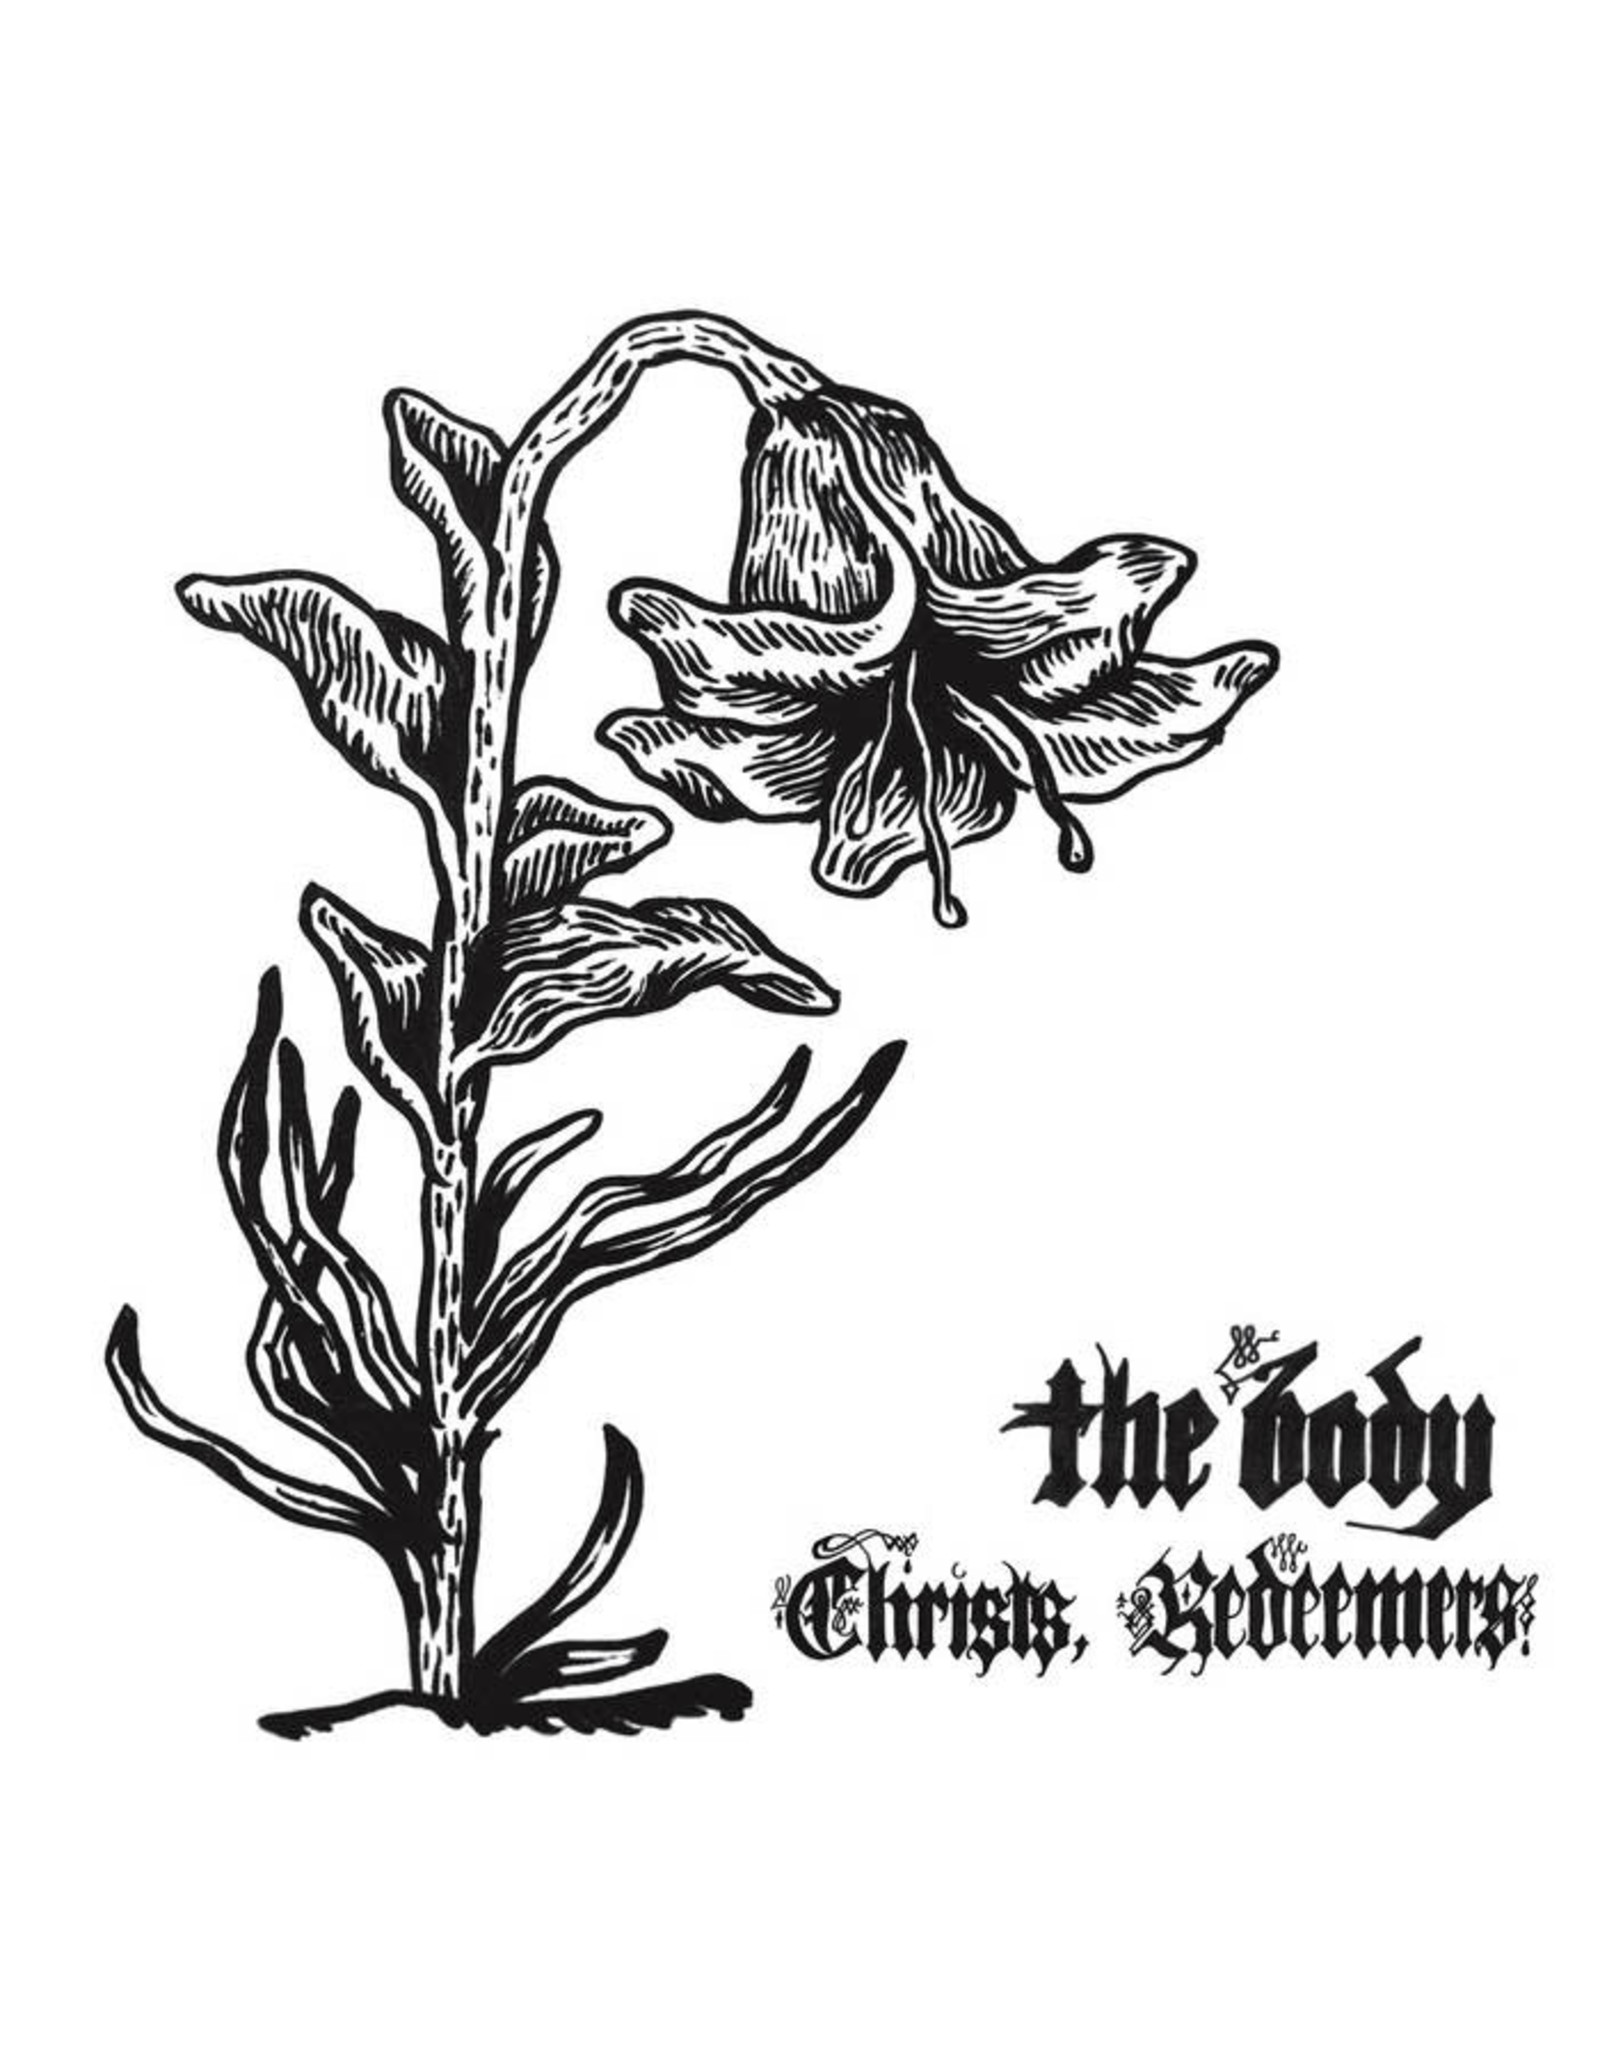 Thrill Jockey Body, The: Christs, Redeemers (INDIE EXCLUSIVE, CLEAR) LP